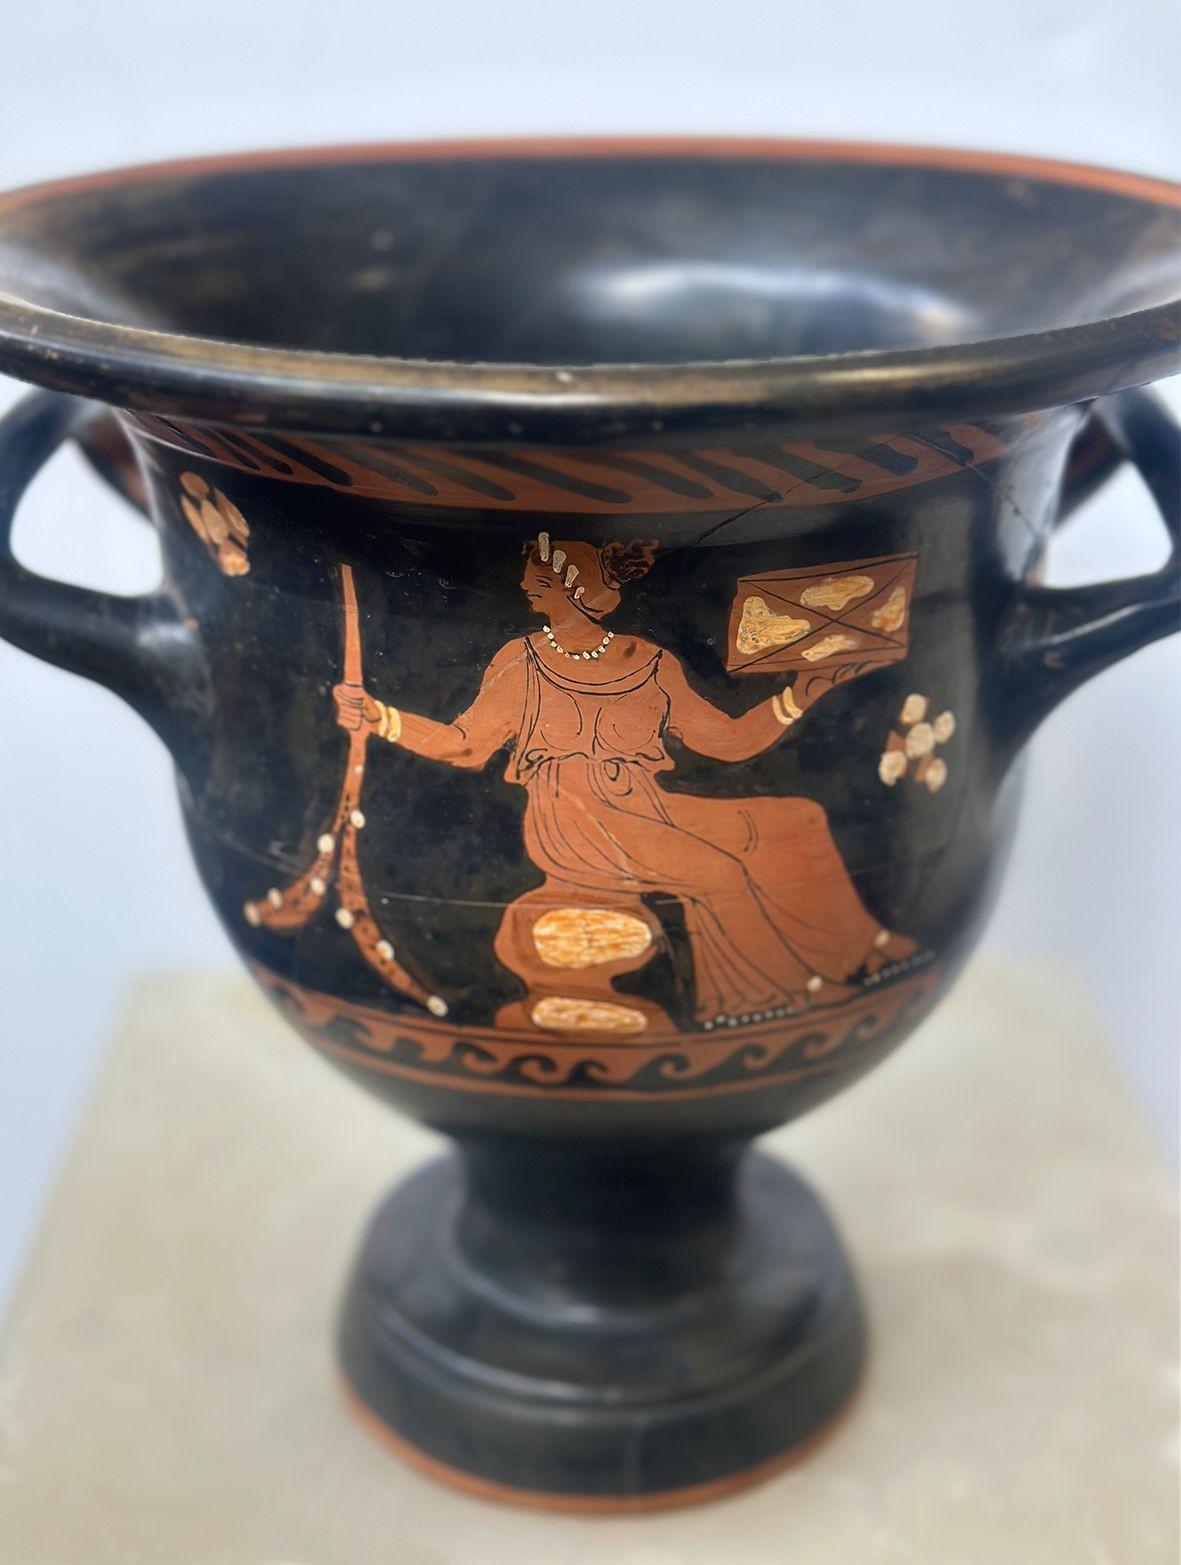 Rare Ancient Apullian Iliupersis pottery bell krater made in the c. 350 B.C. having fine traditional figures. One side shows a seated maiden wearing a sleeveless garment, and the other side shows an abstract depiction of a lady contemplating herself